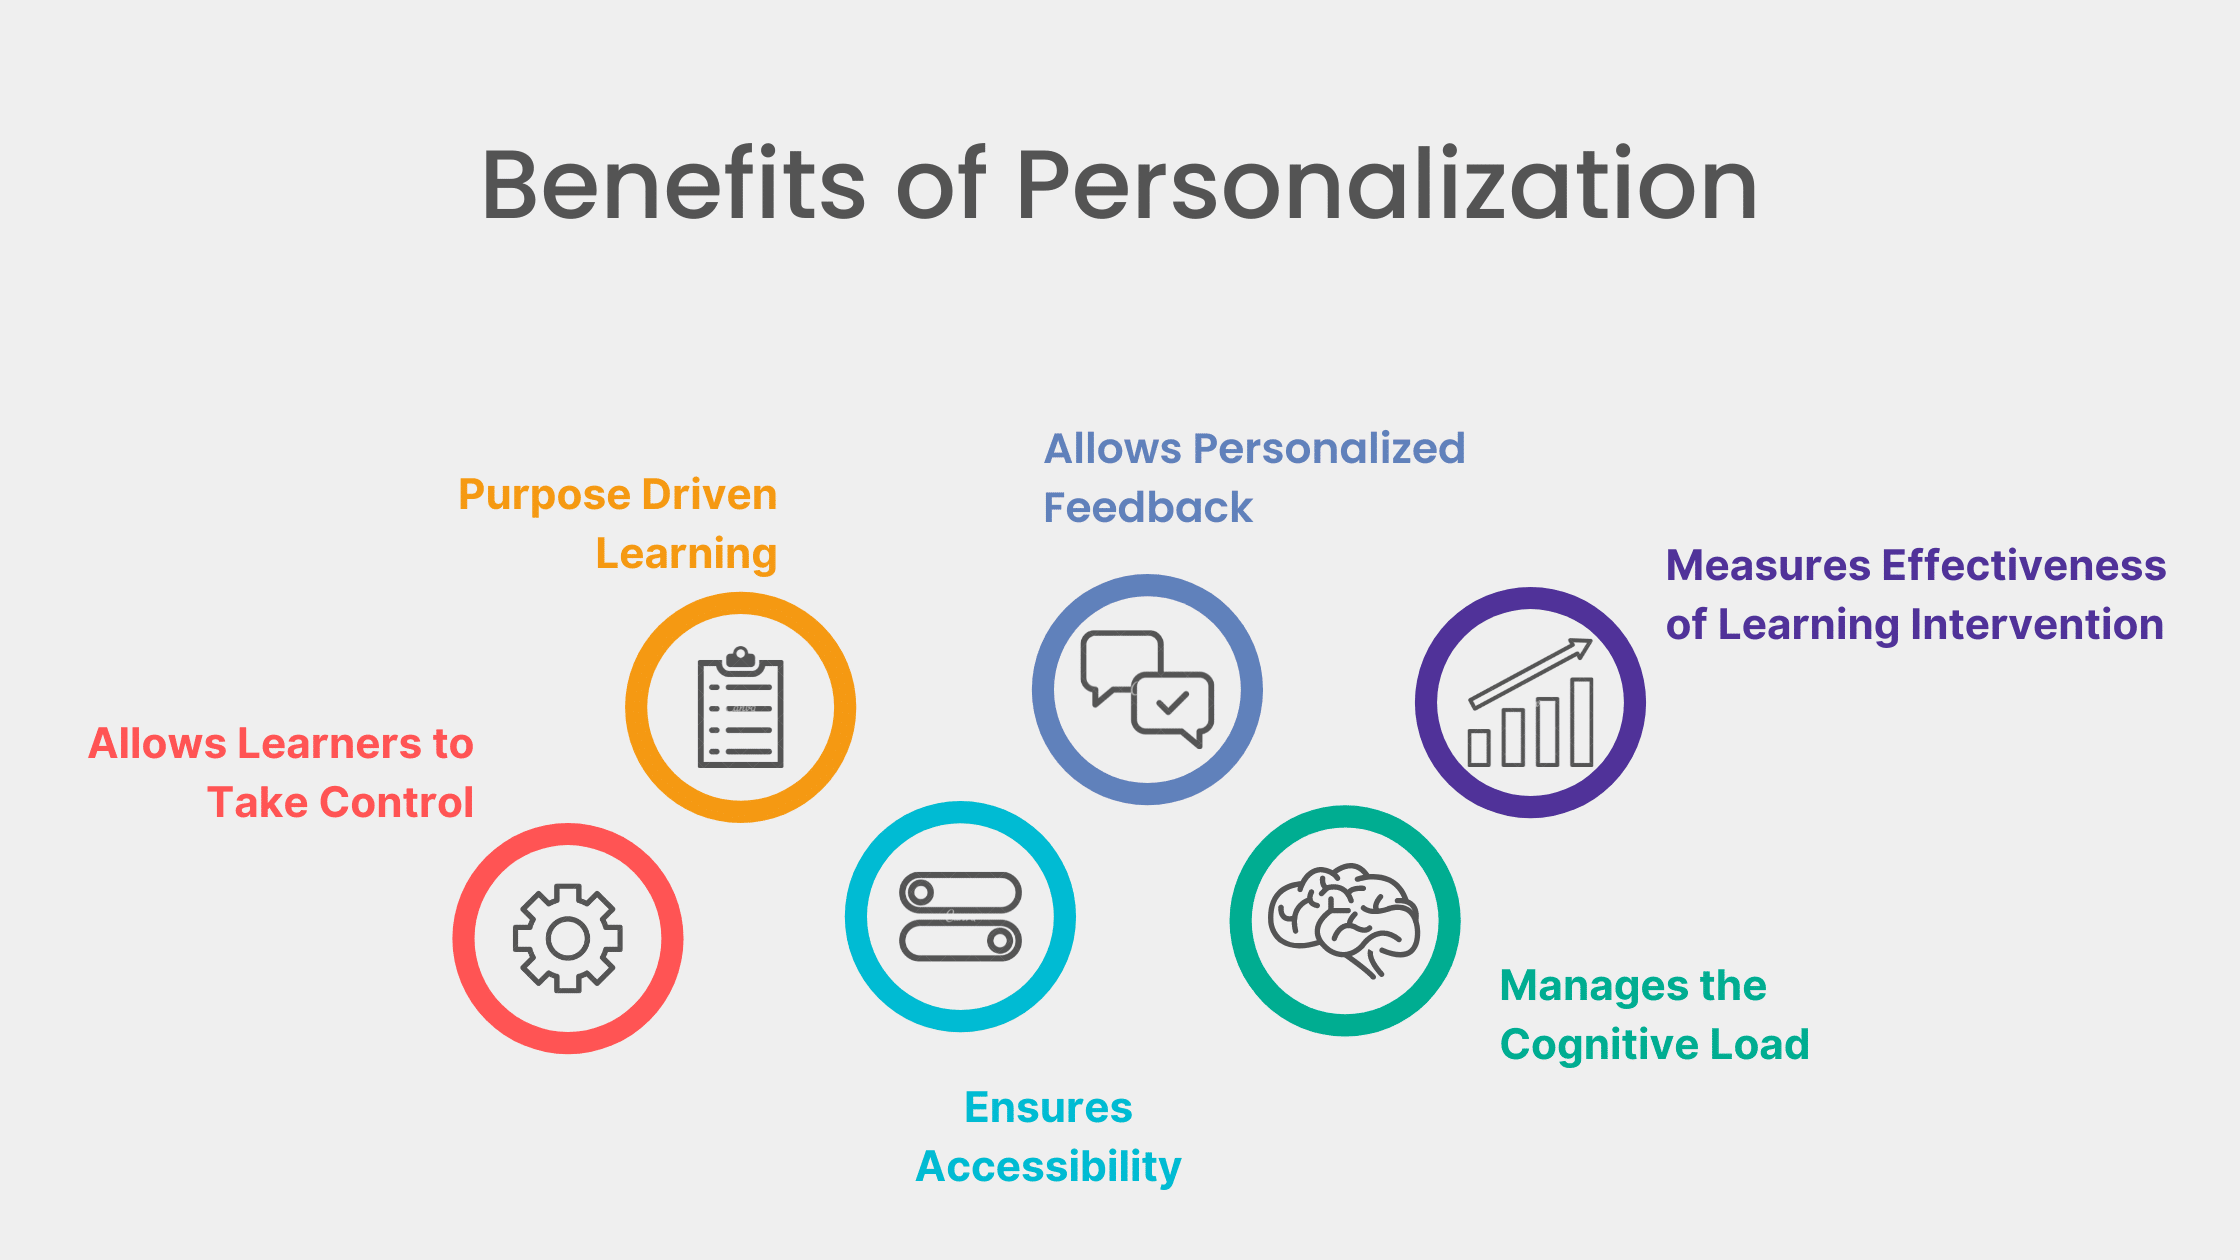 Benefits of Personalization in eLearning